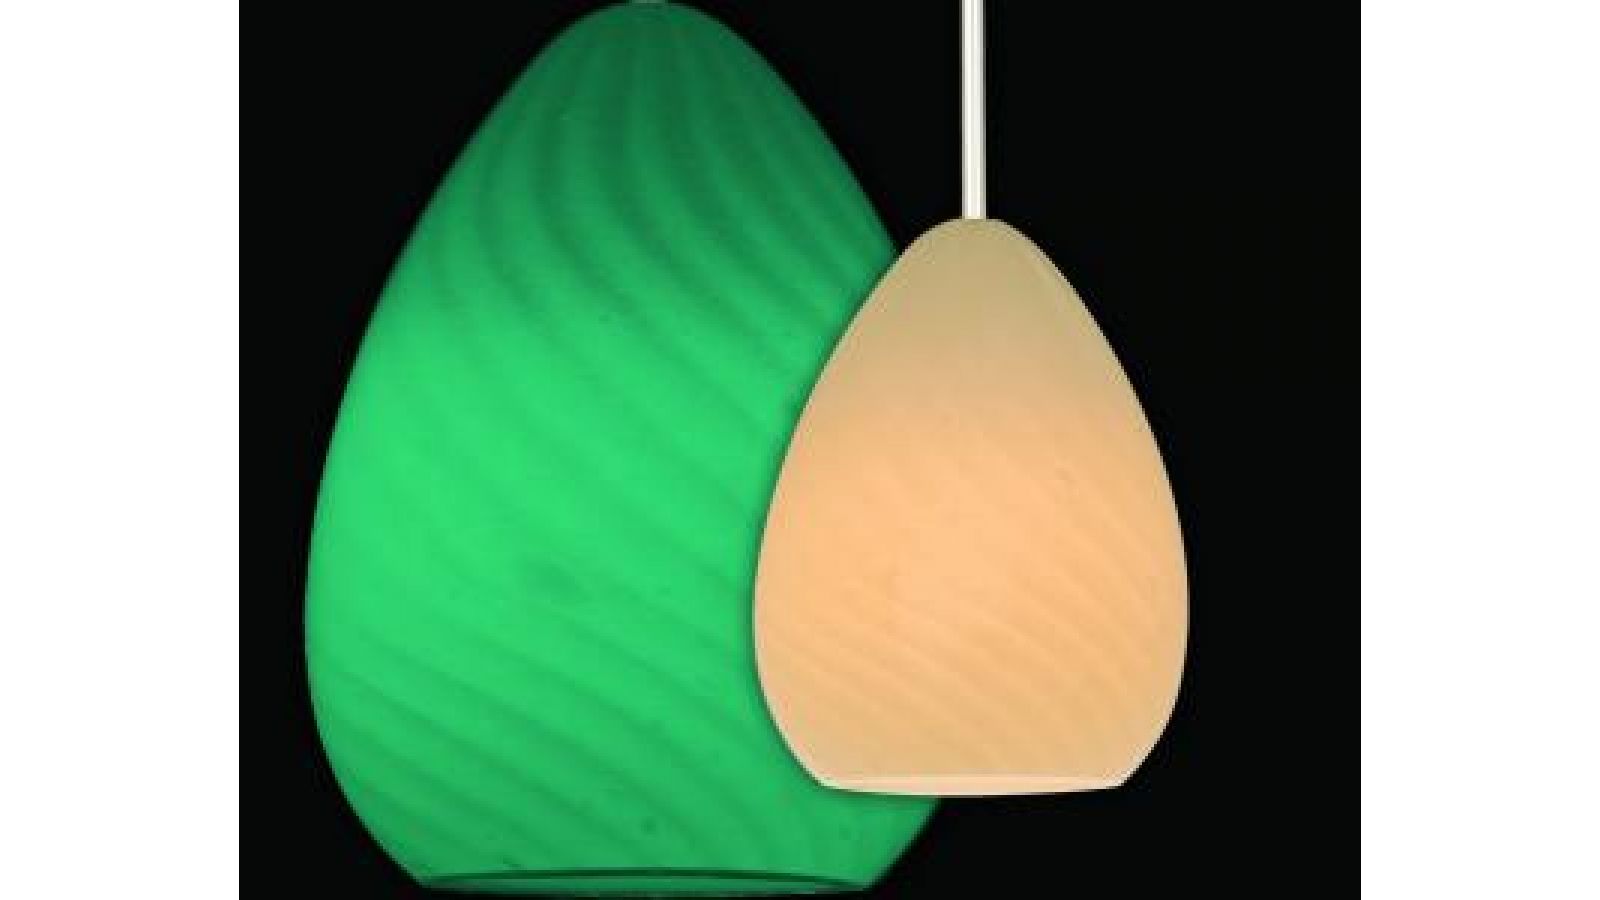 WAC LIGHTING Introduces YU Pendant with Unique 